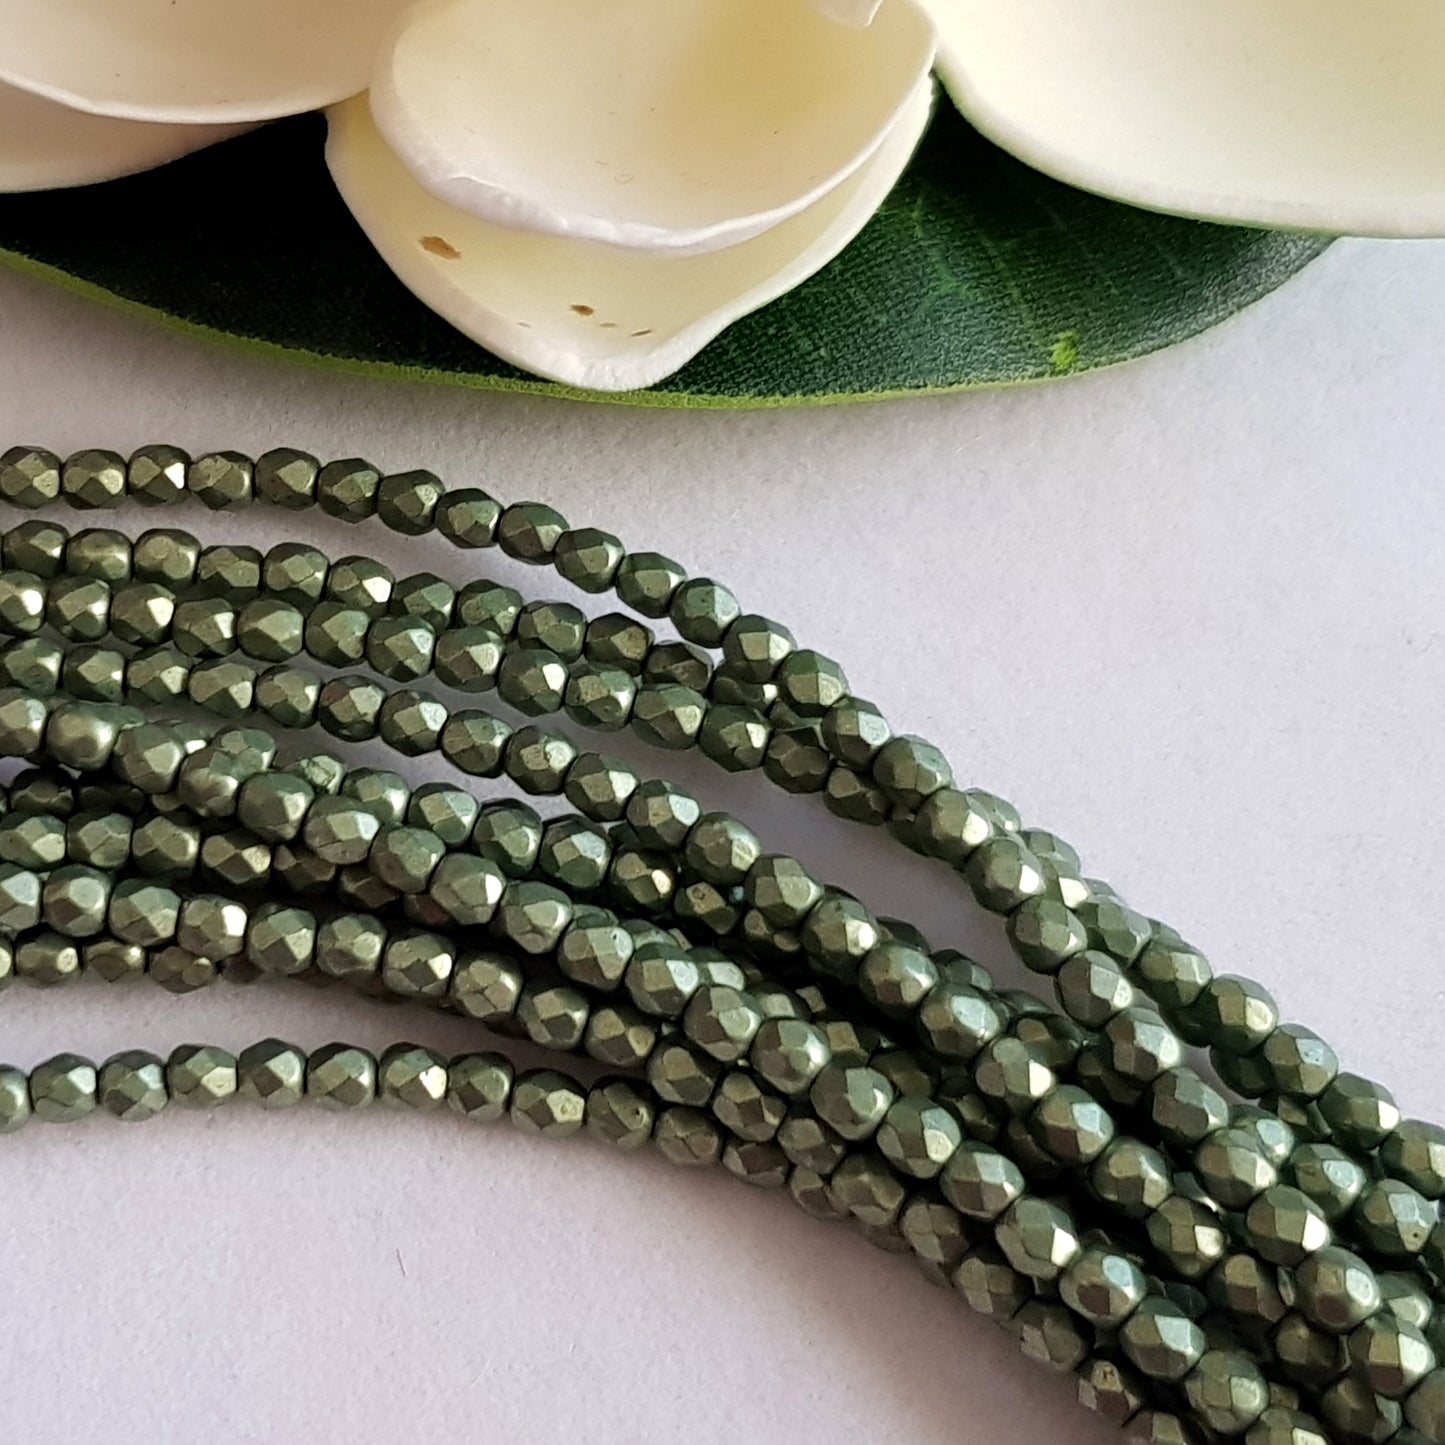 Czech Fire Polished 50 Bead Strand - Sueded Gold Fern 3mm Round Faceted  |  FP-08A06-CB-03 | Beading Supply